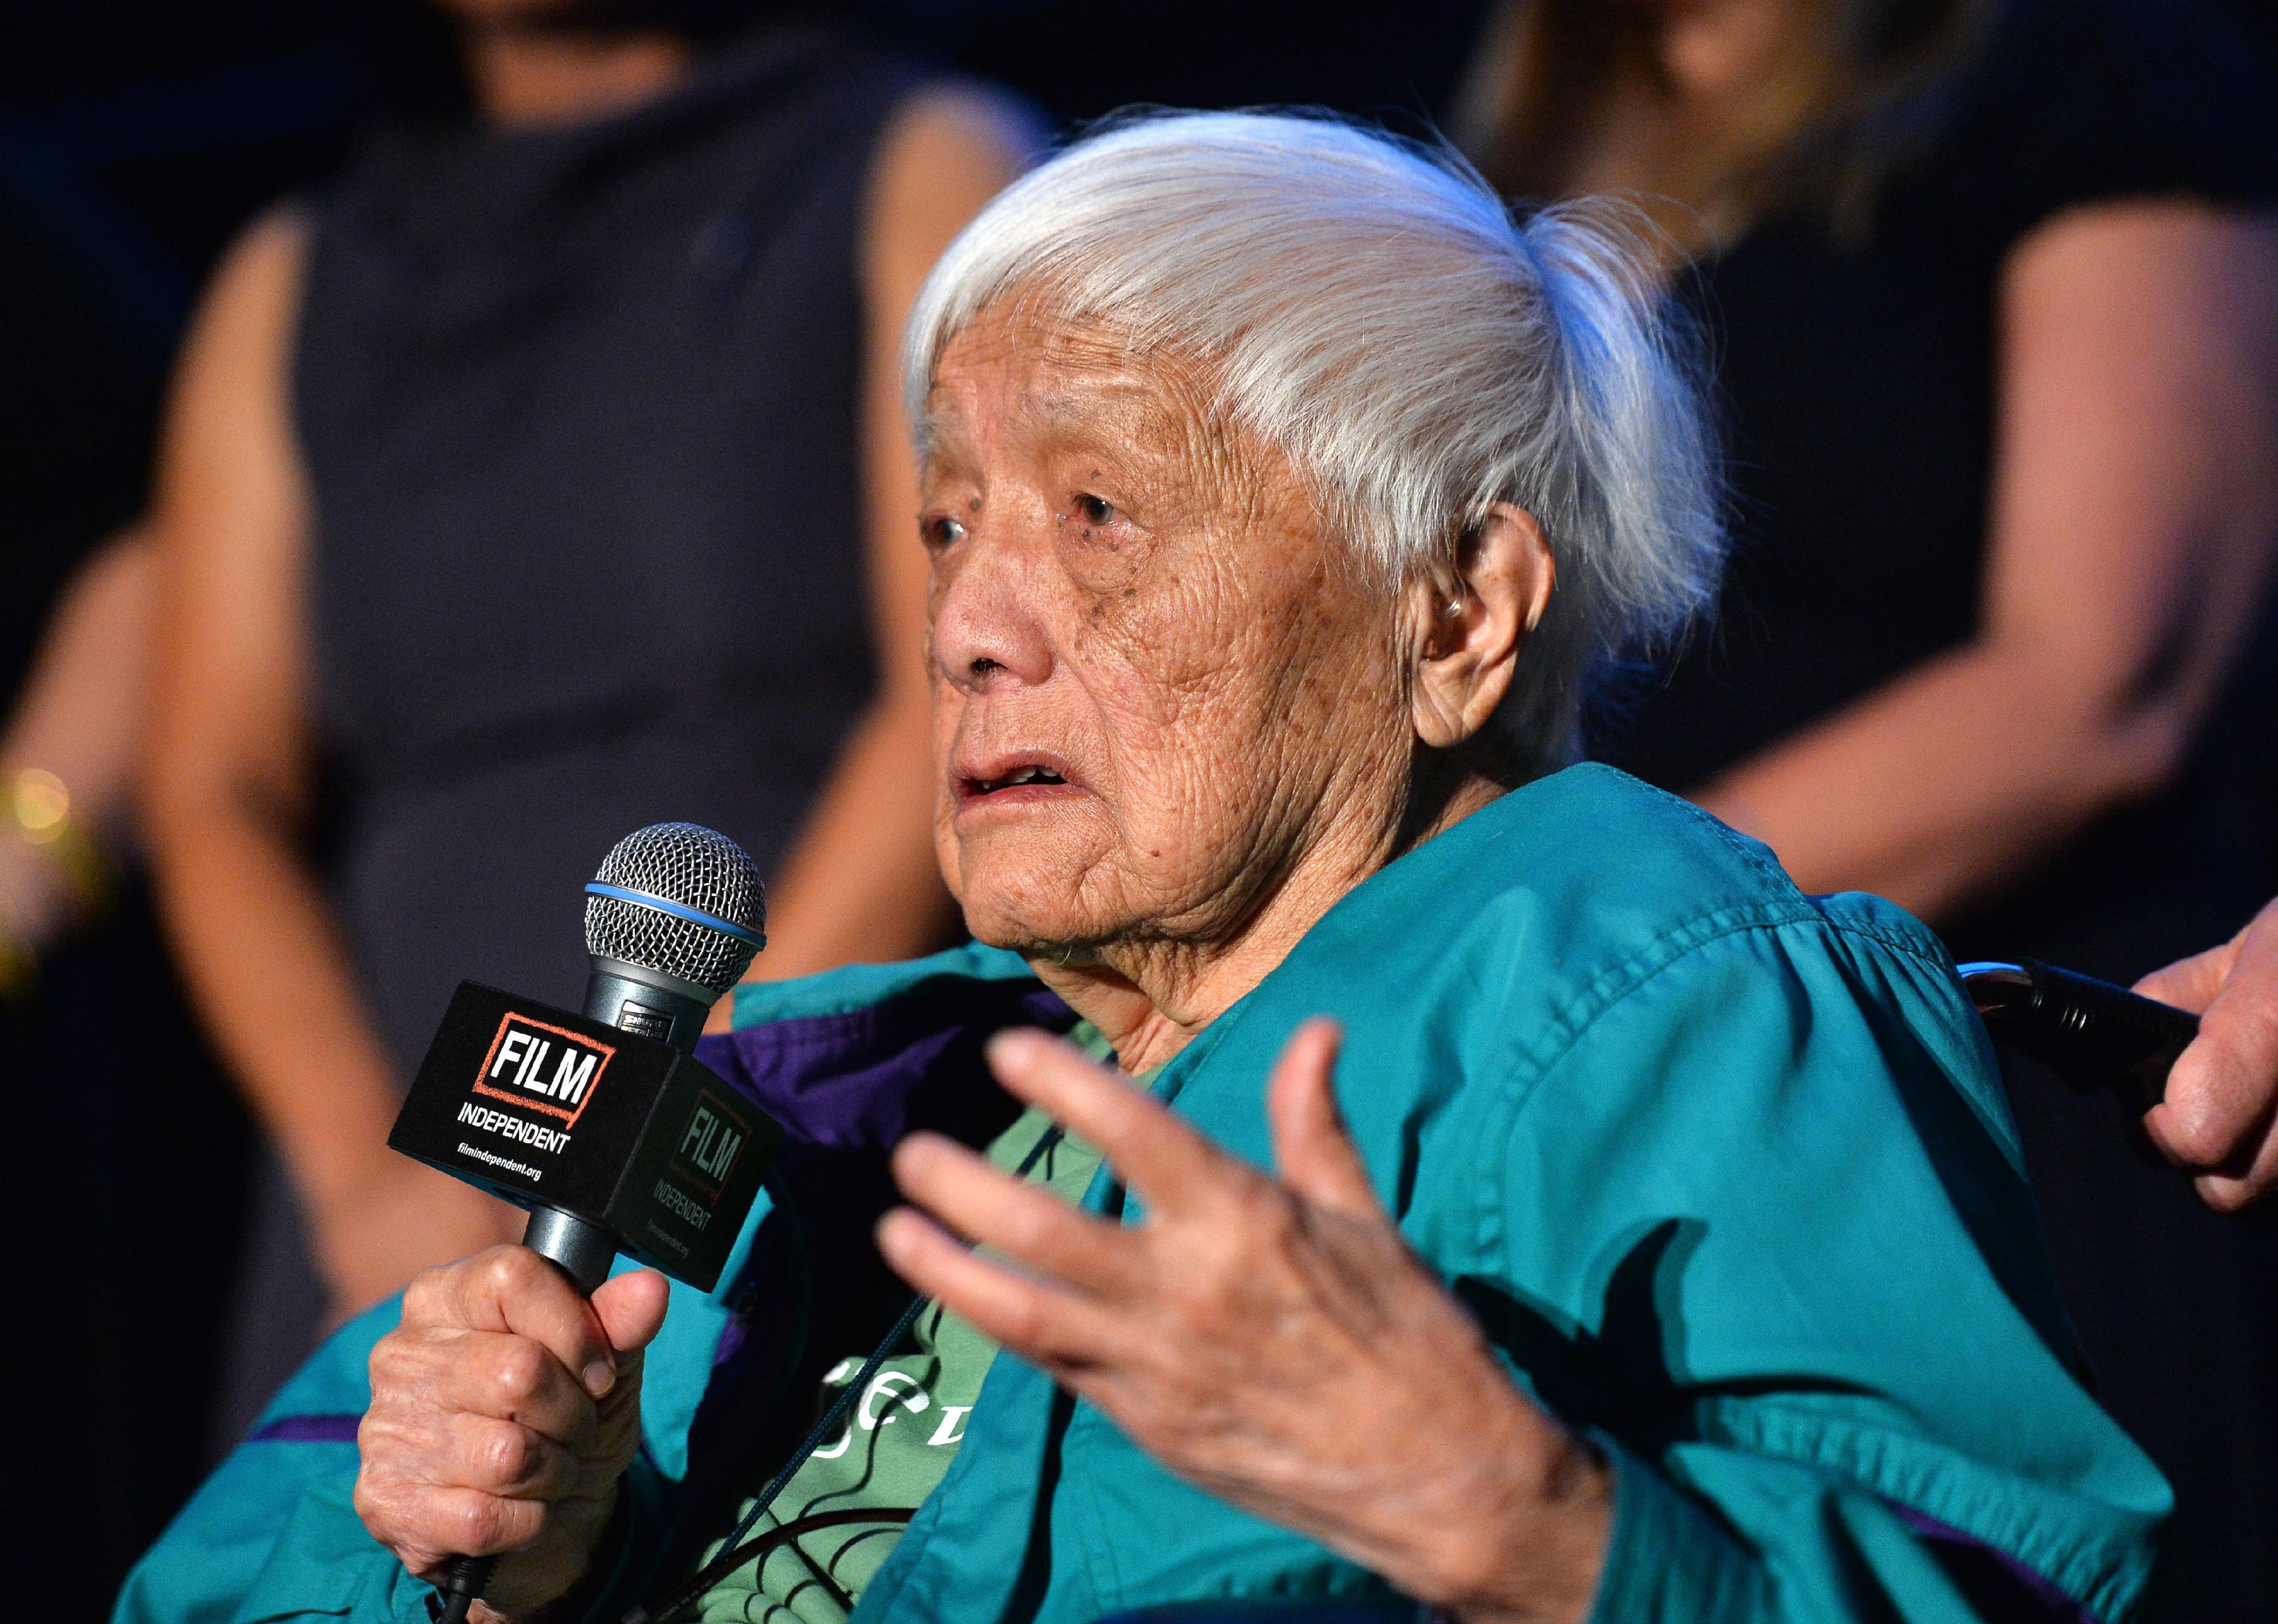  Documentary subject Grace Lee Boggs speaks on stage at the "American Revolutionary" premiere.